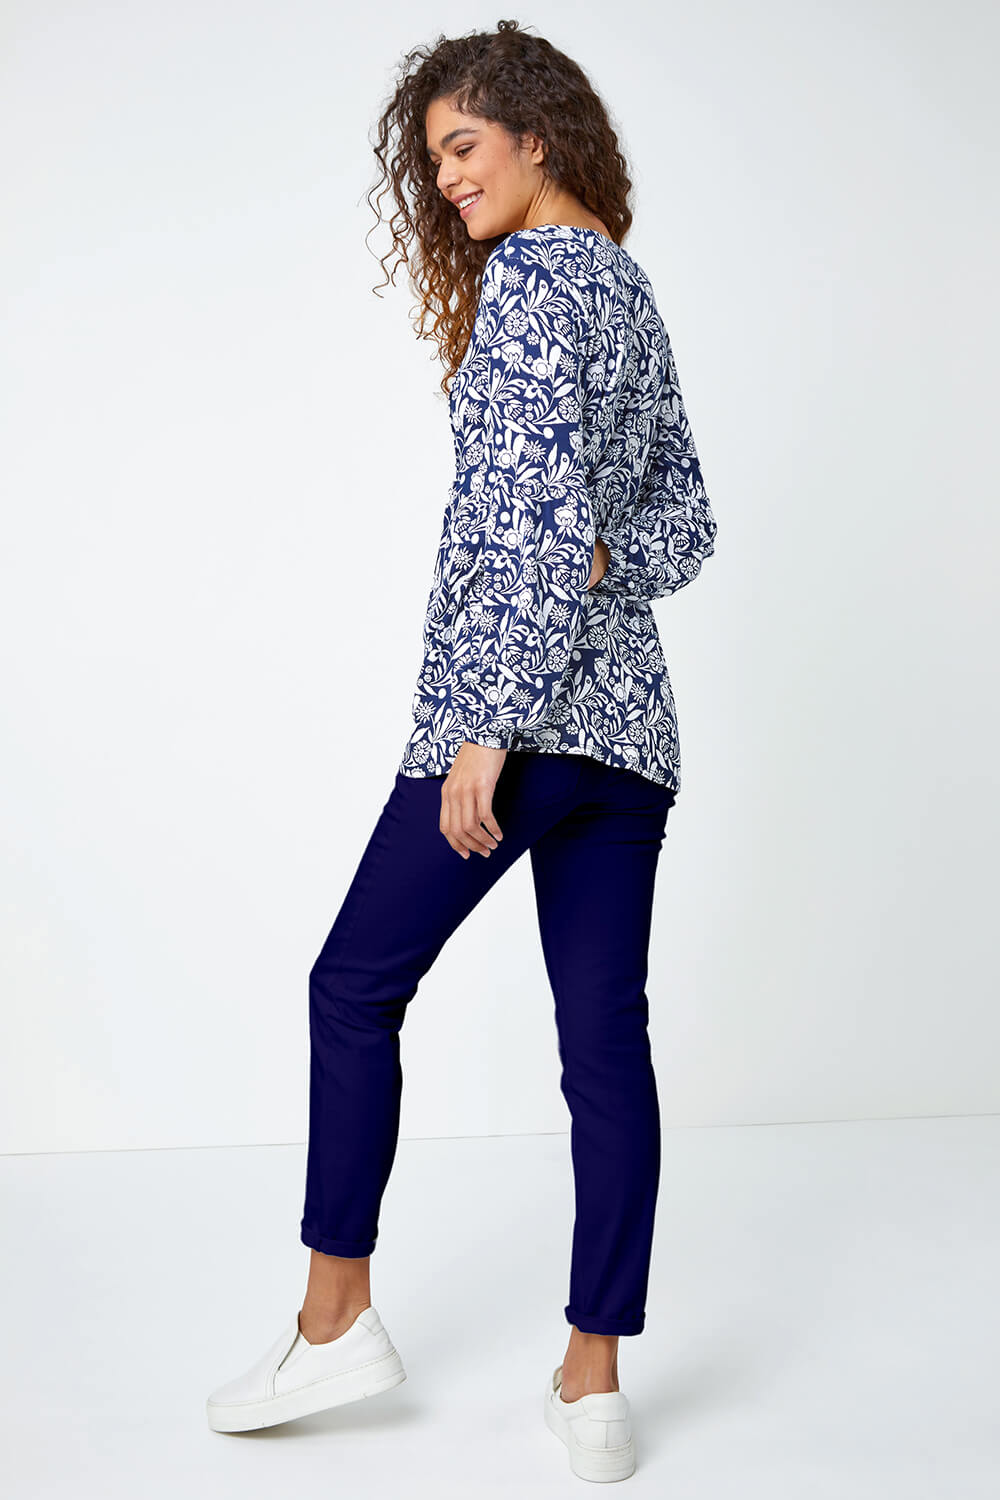 Navy  Floral Print Stretch Smock Top, Image 2 of 5